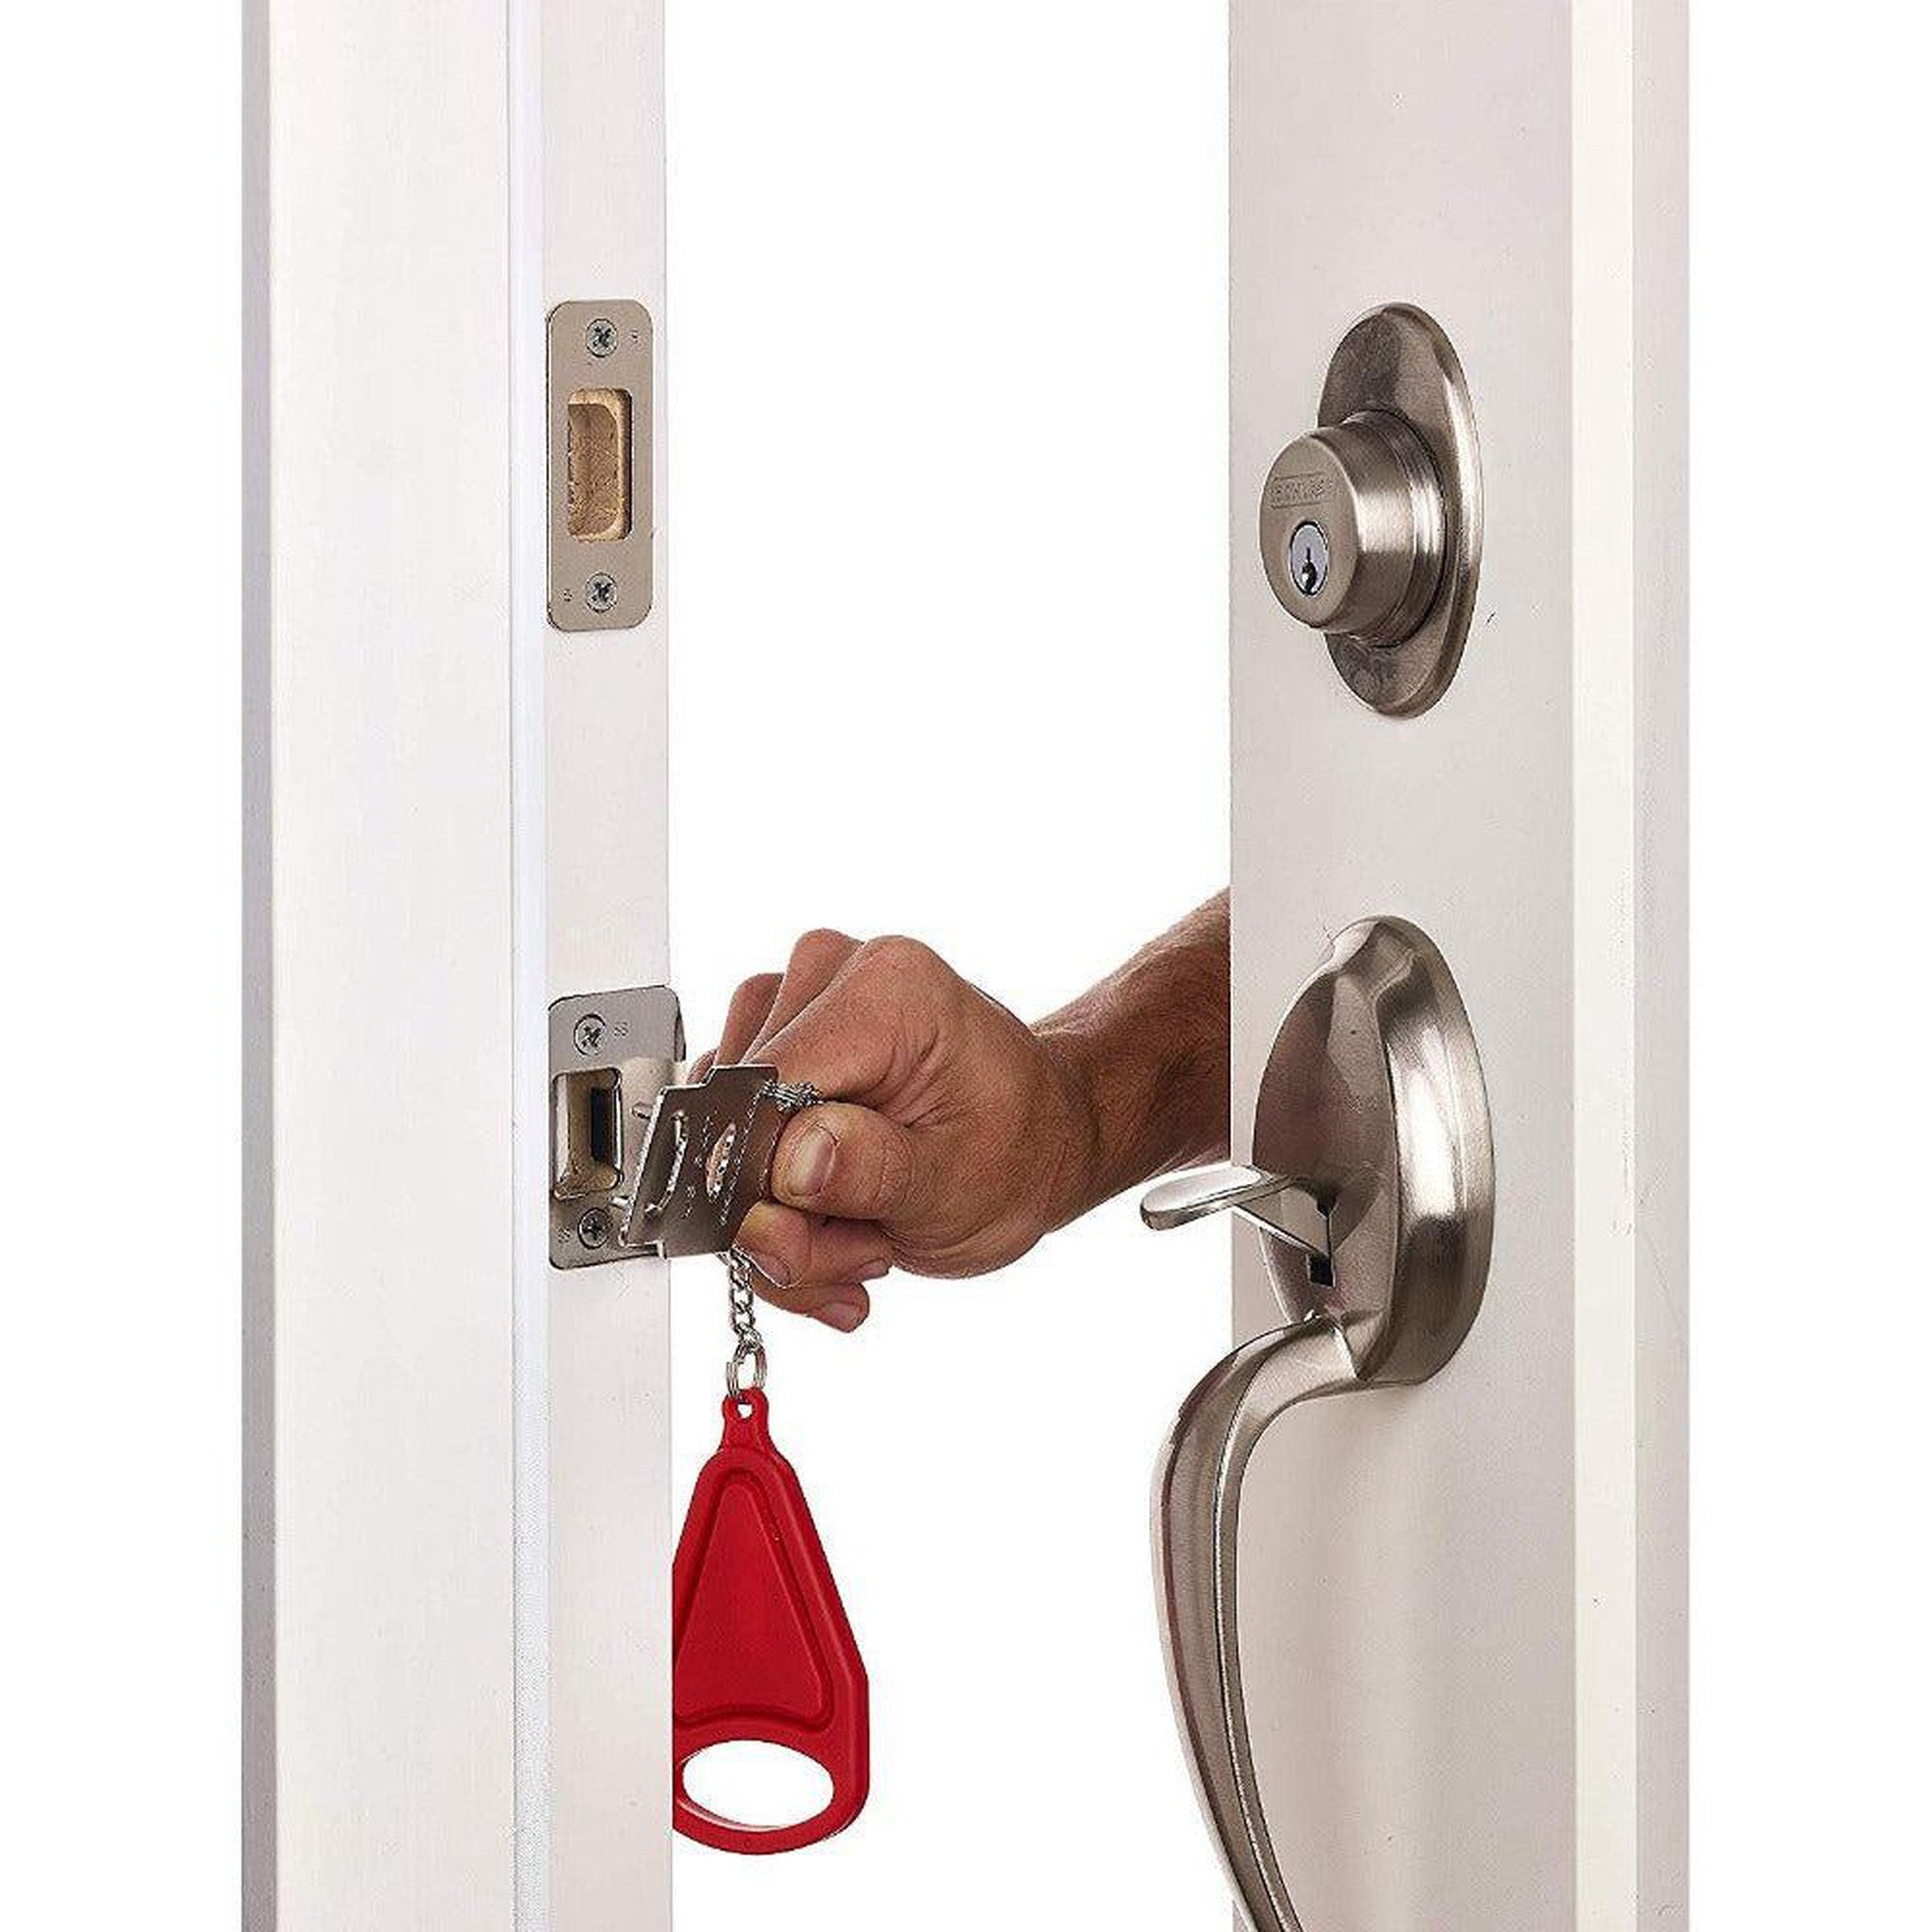 FORTRESS™ Door Guard - The Portable Security Lock